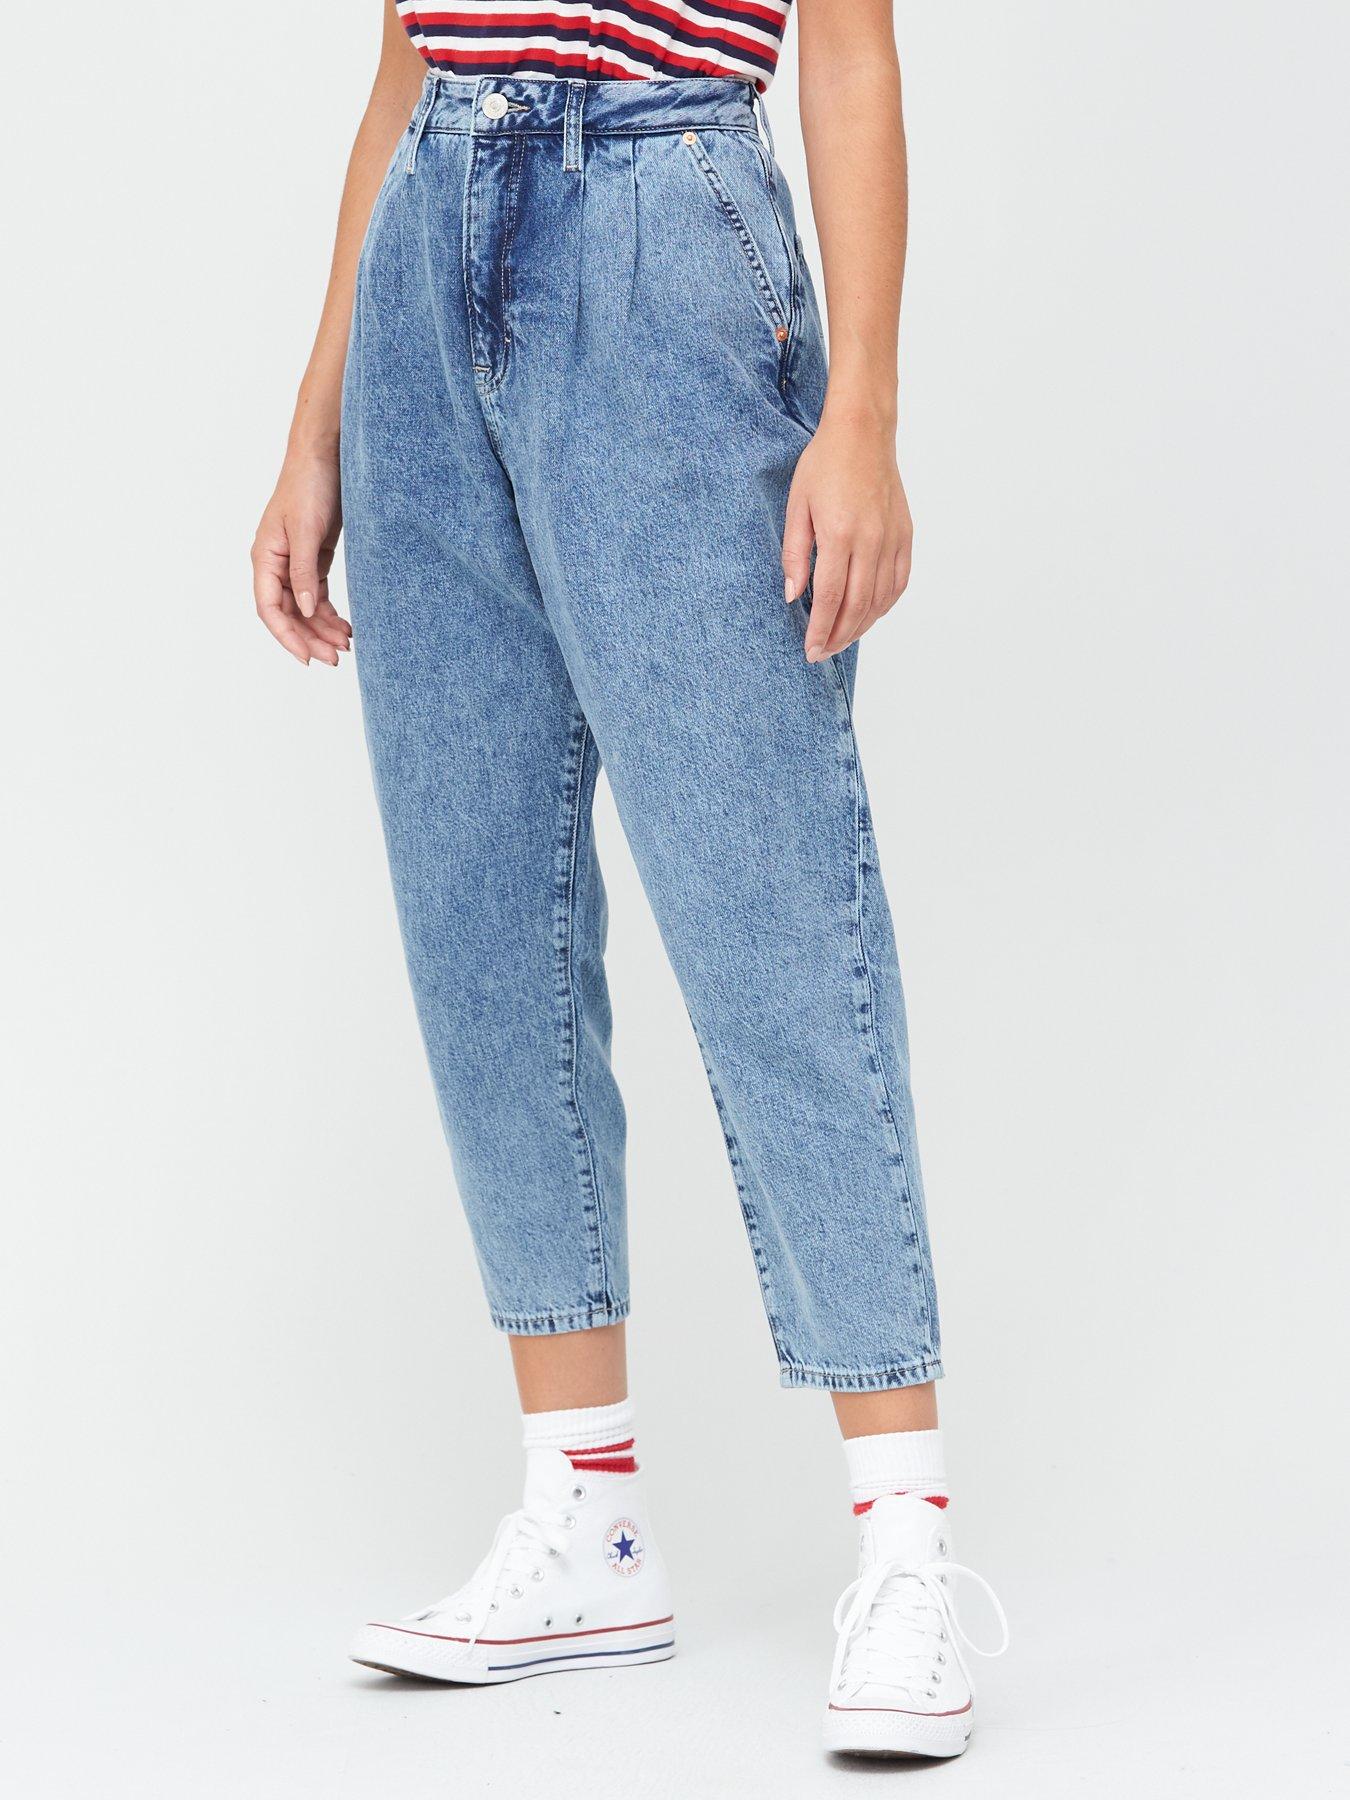 Tommy Jeans Retro Mom Jeans - Blue 